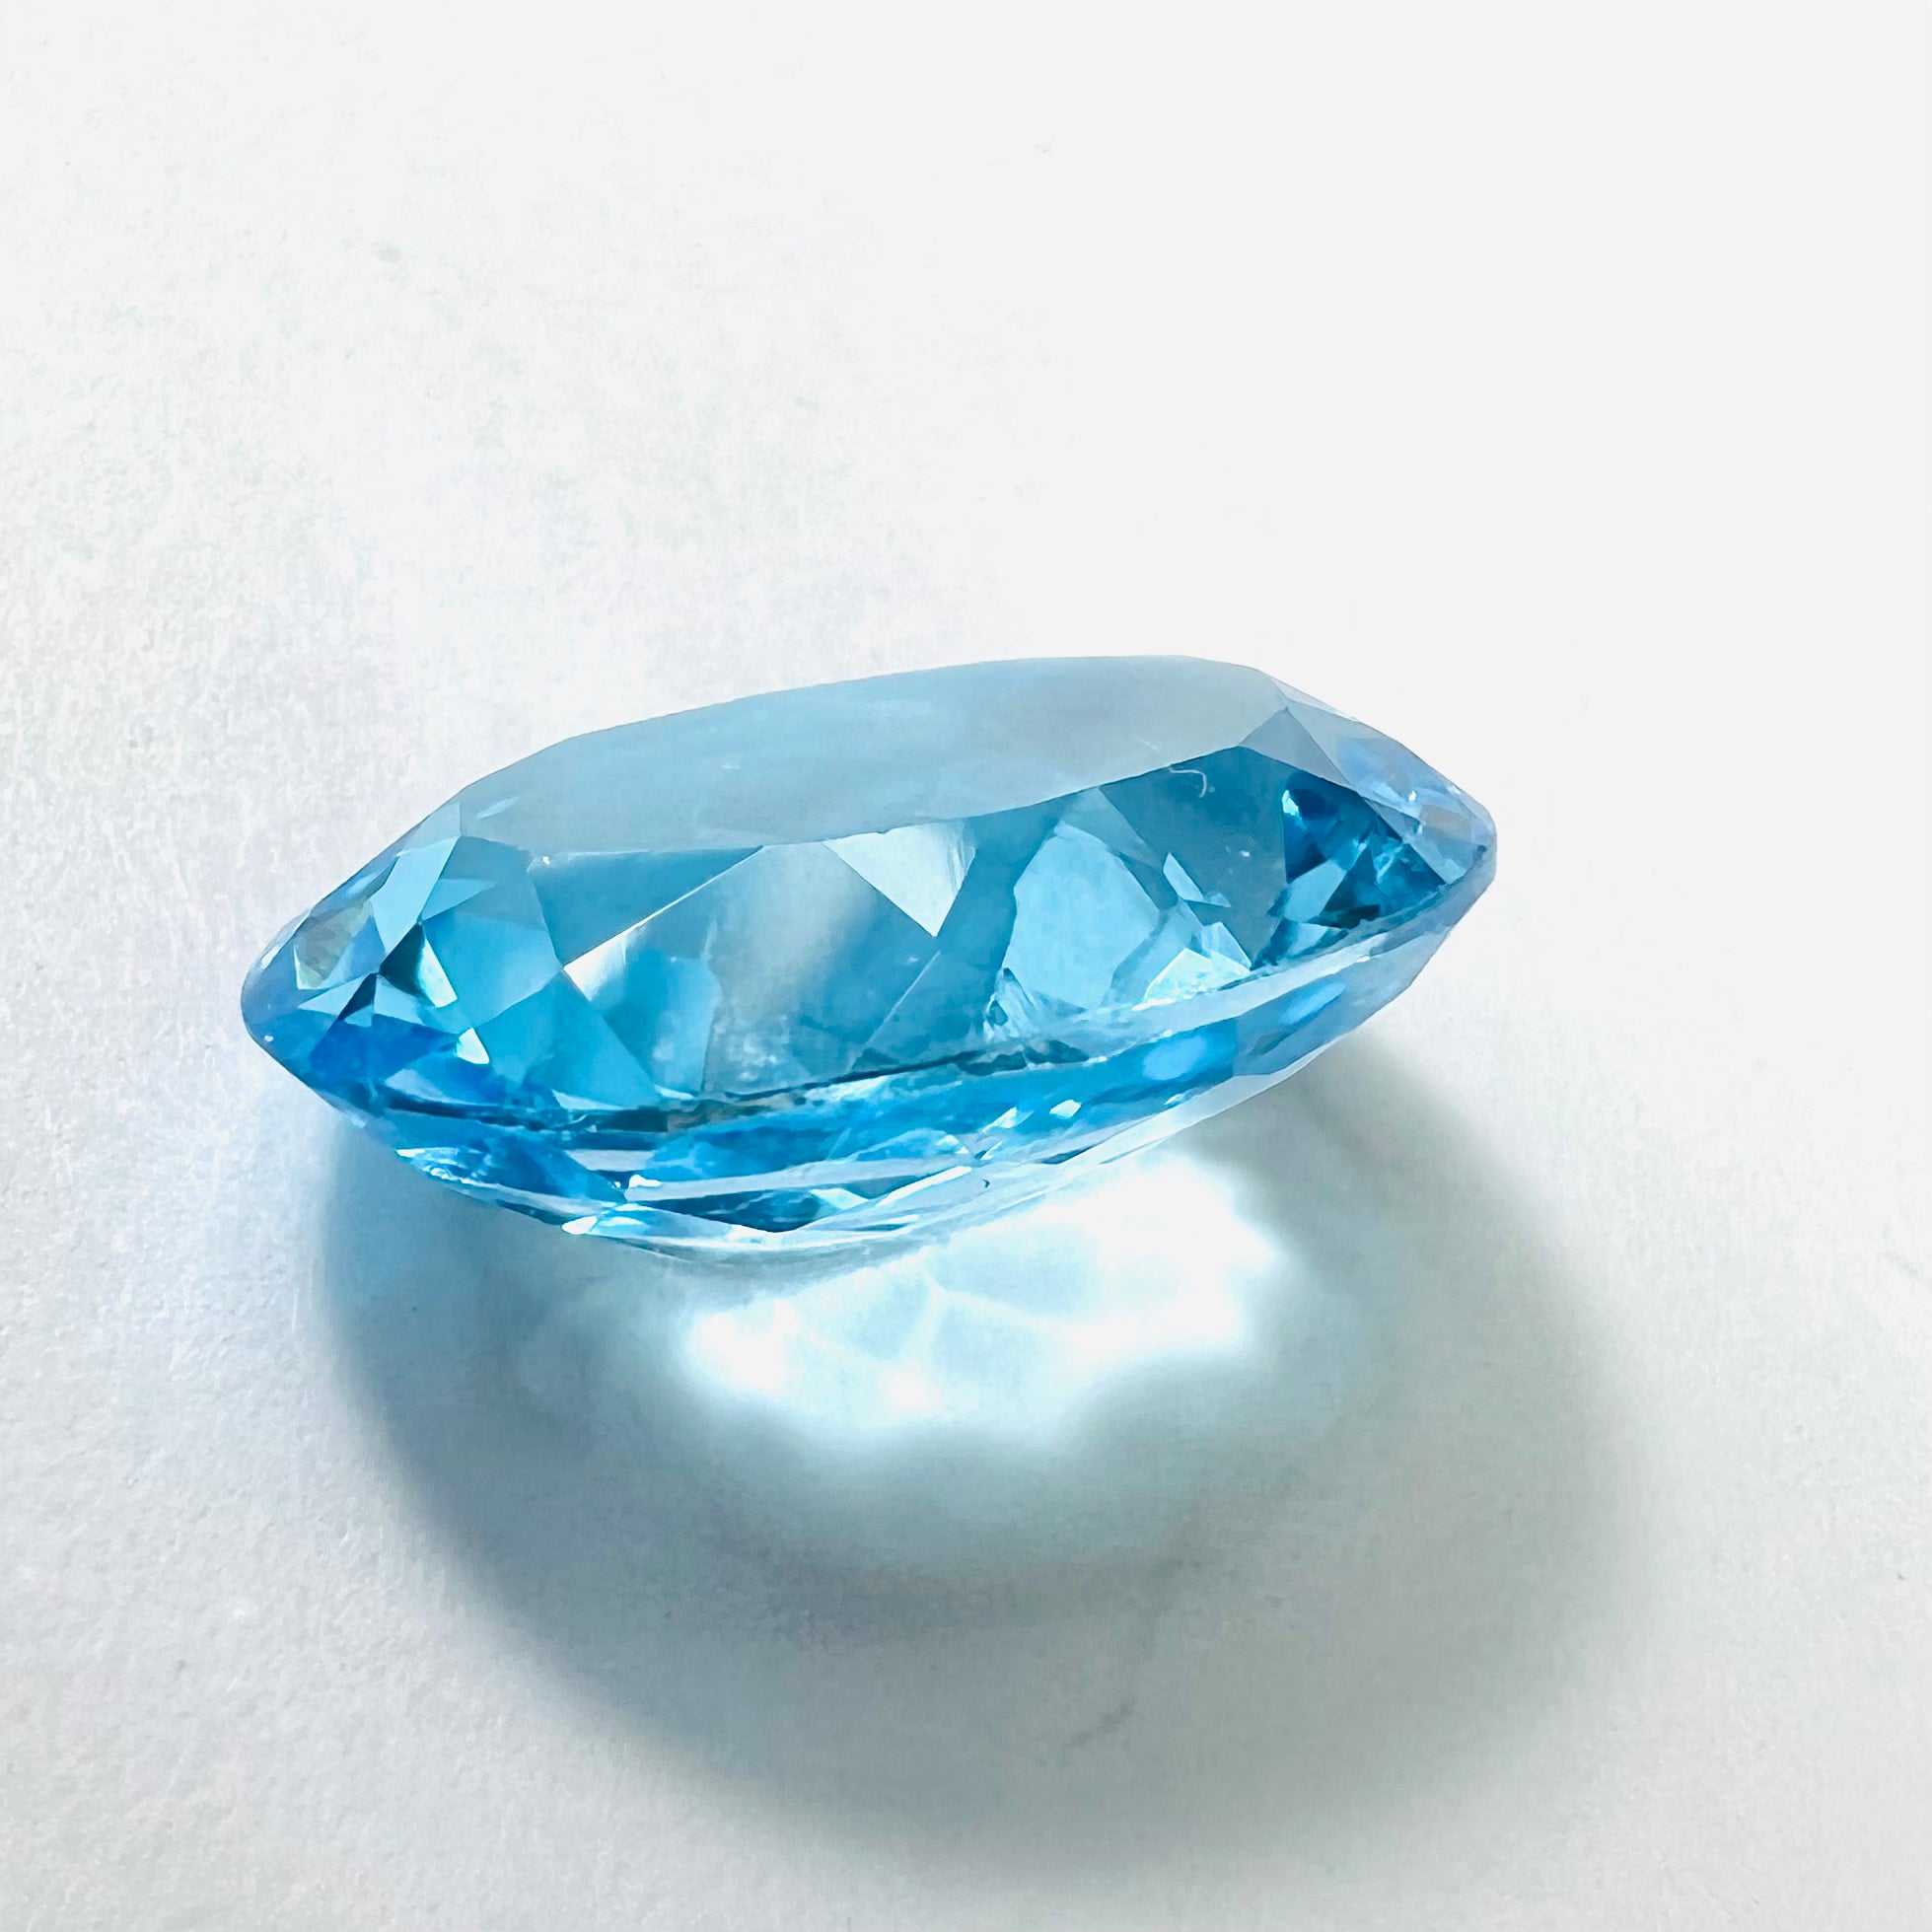 6.48CTW Loose Natural Oval Cut Topaz 14x10x5.75mm Earth mined Gemstone